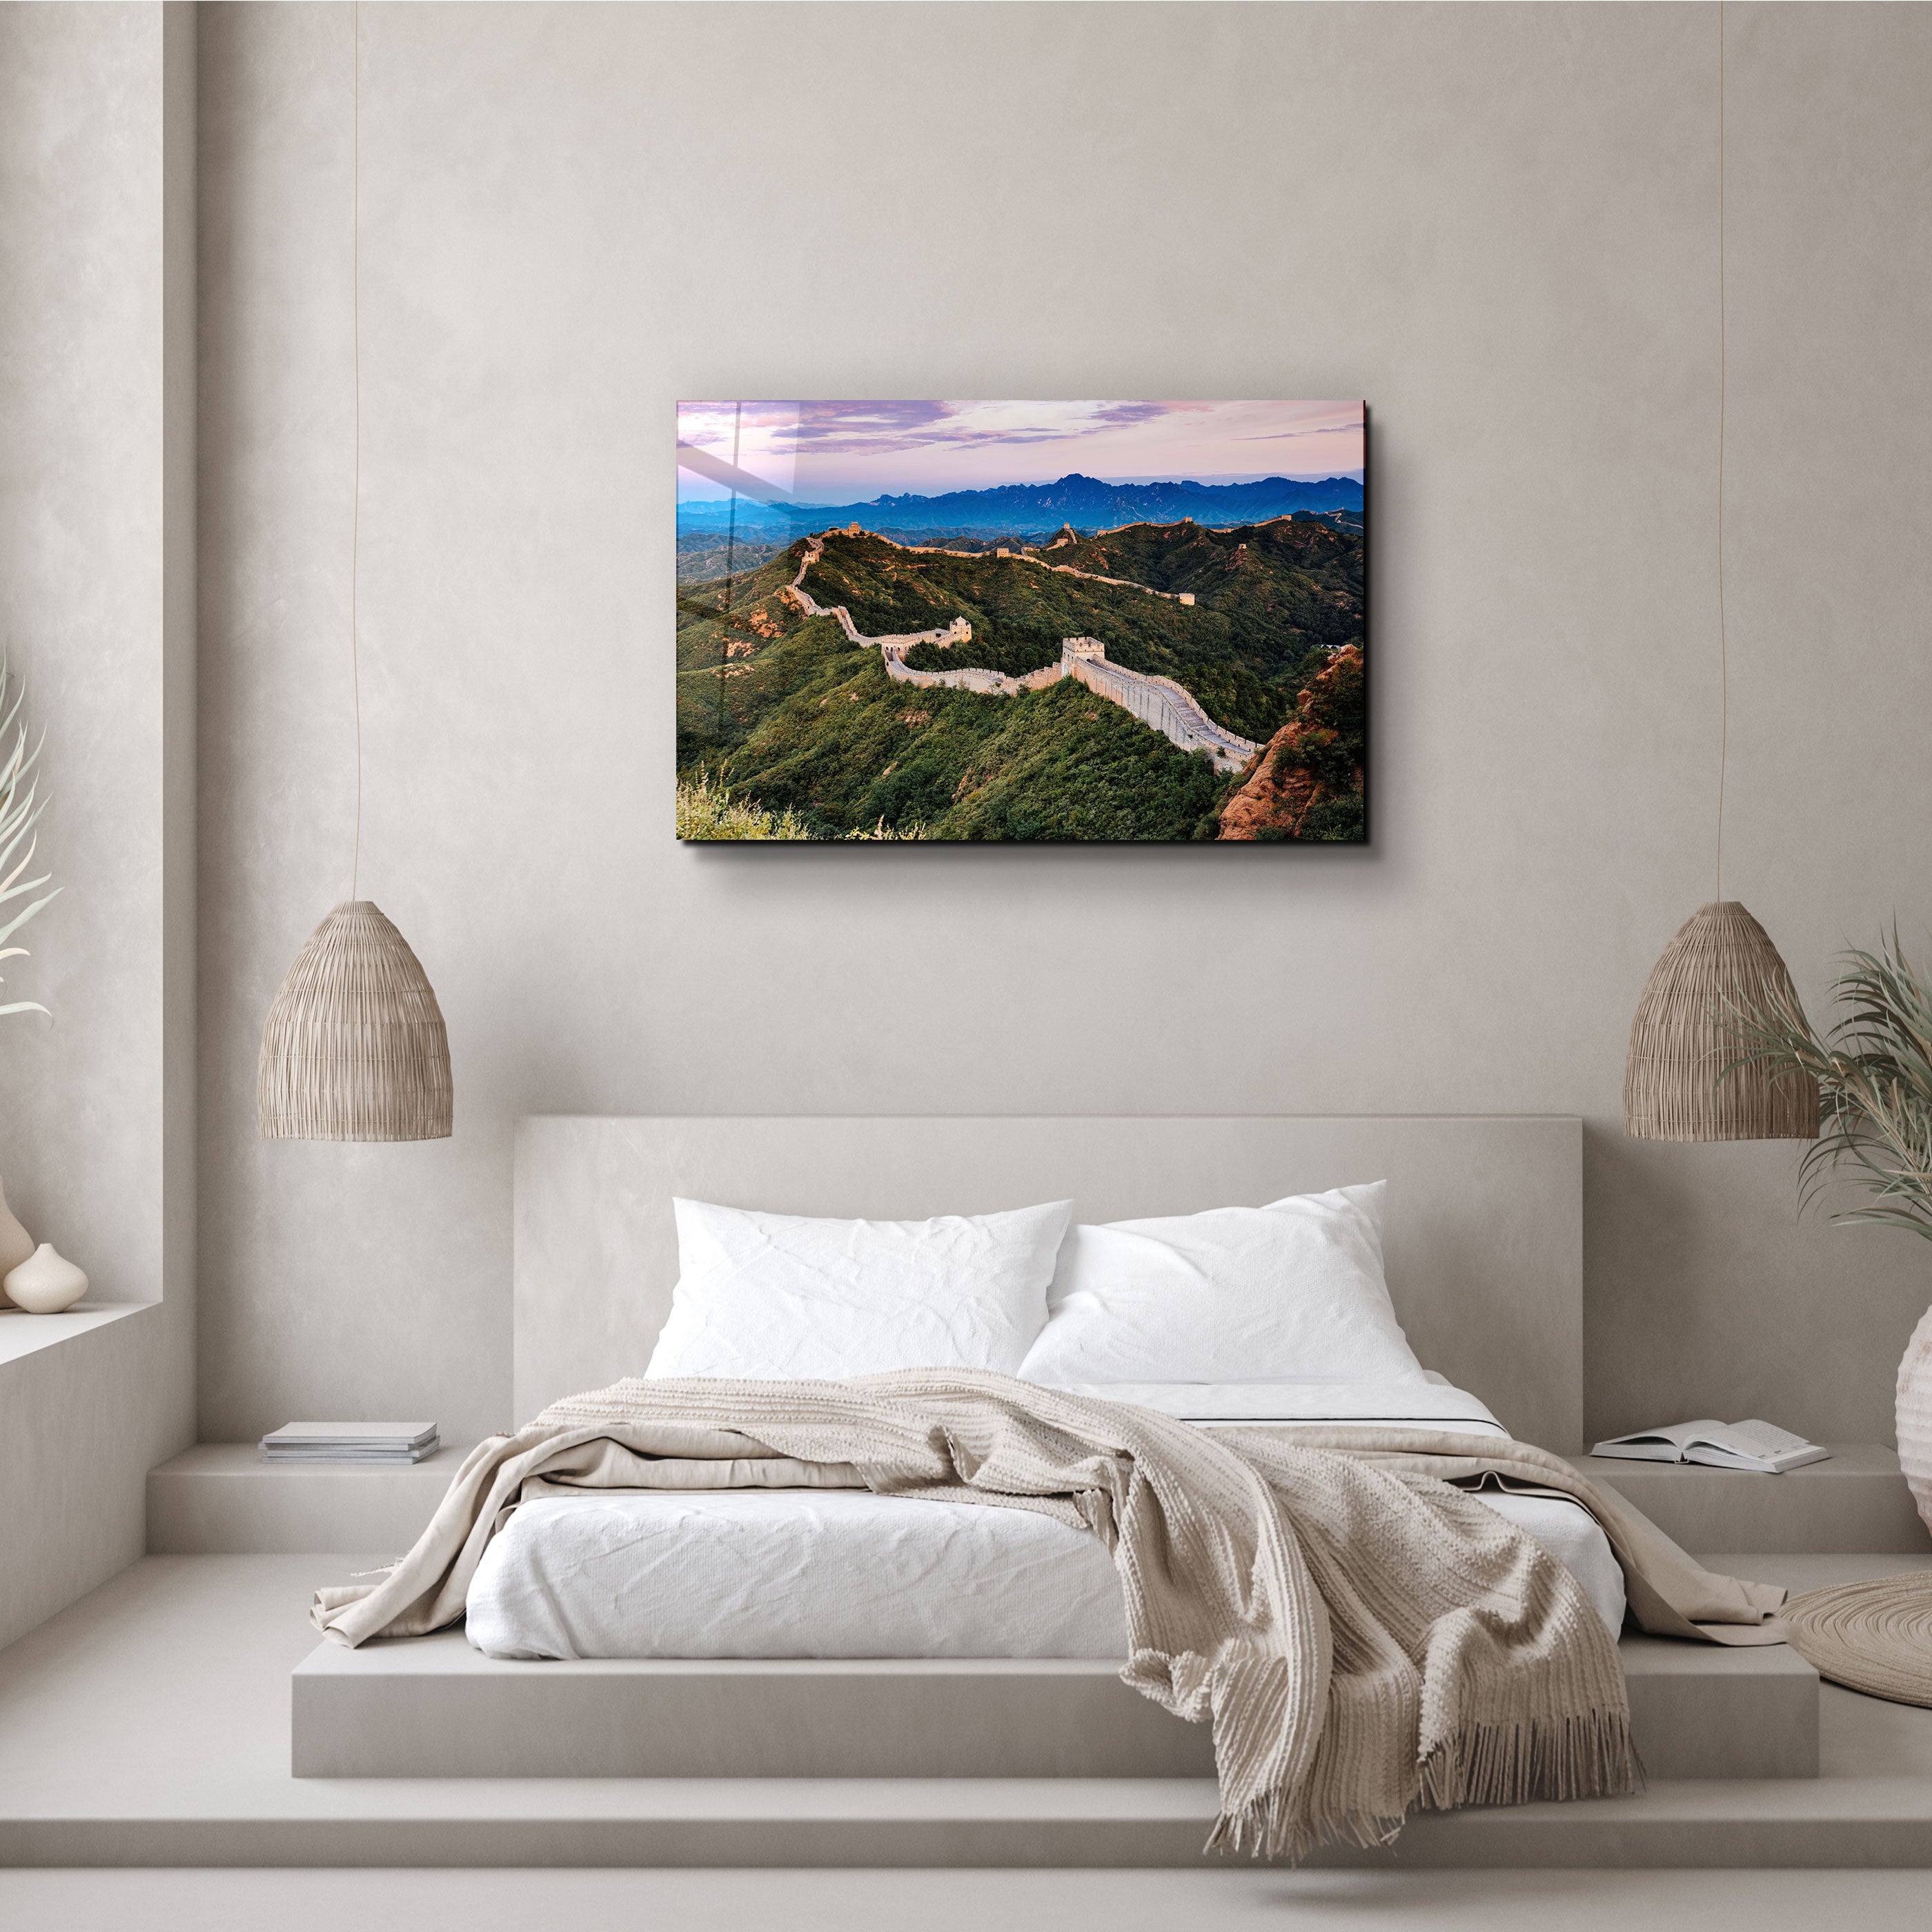 ・"The Great Wall of China"・Glass Wall Art